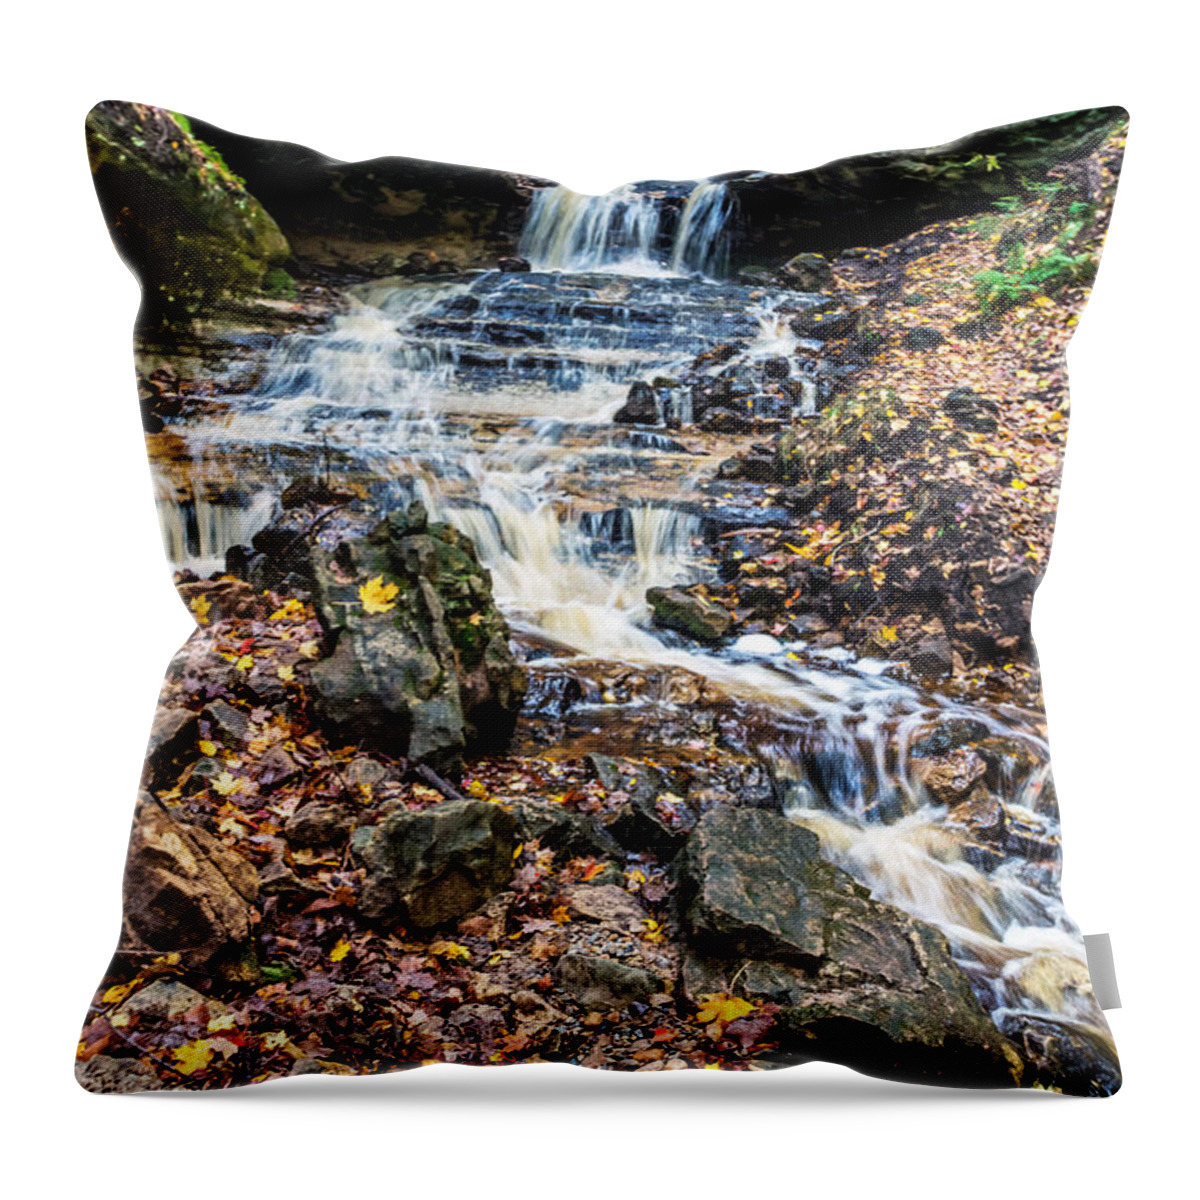 Horseshoe Falls Throw Pillow featuring the photograph Looking Down Horseshoe Falls by Lonnie Paulson